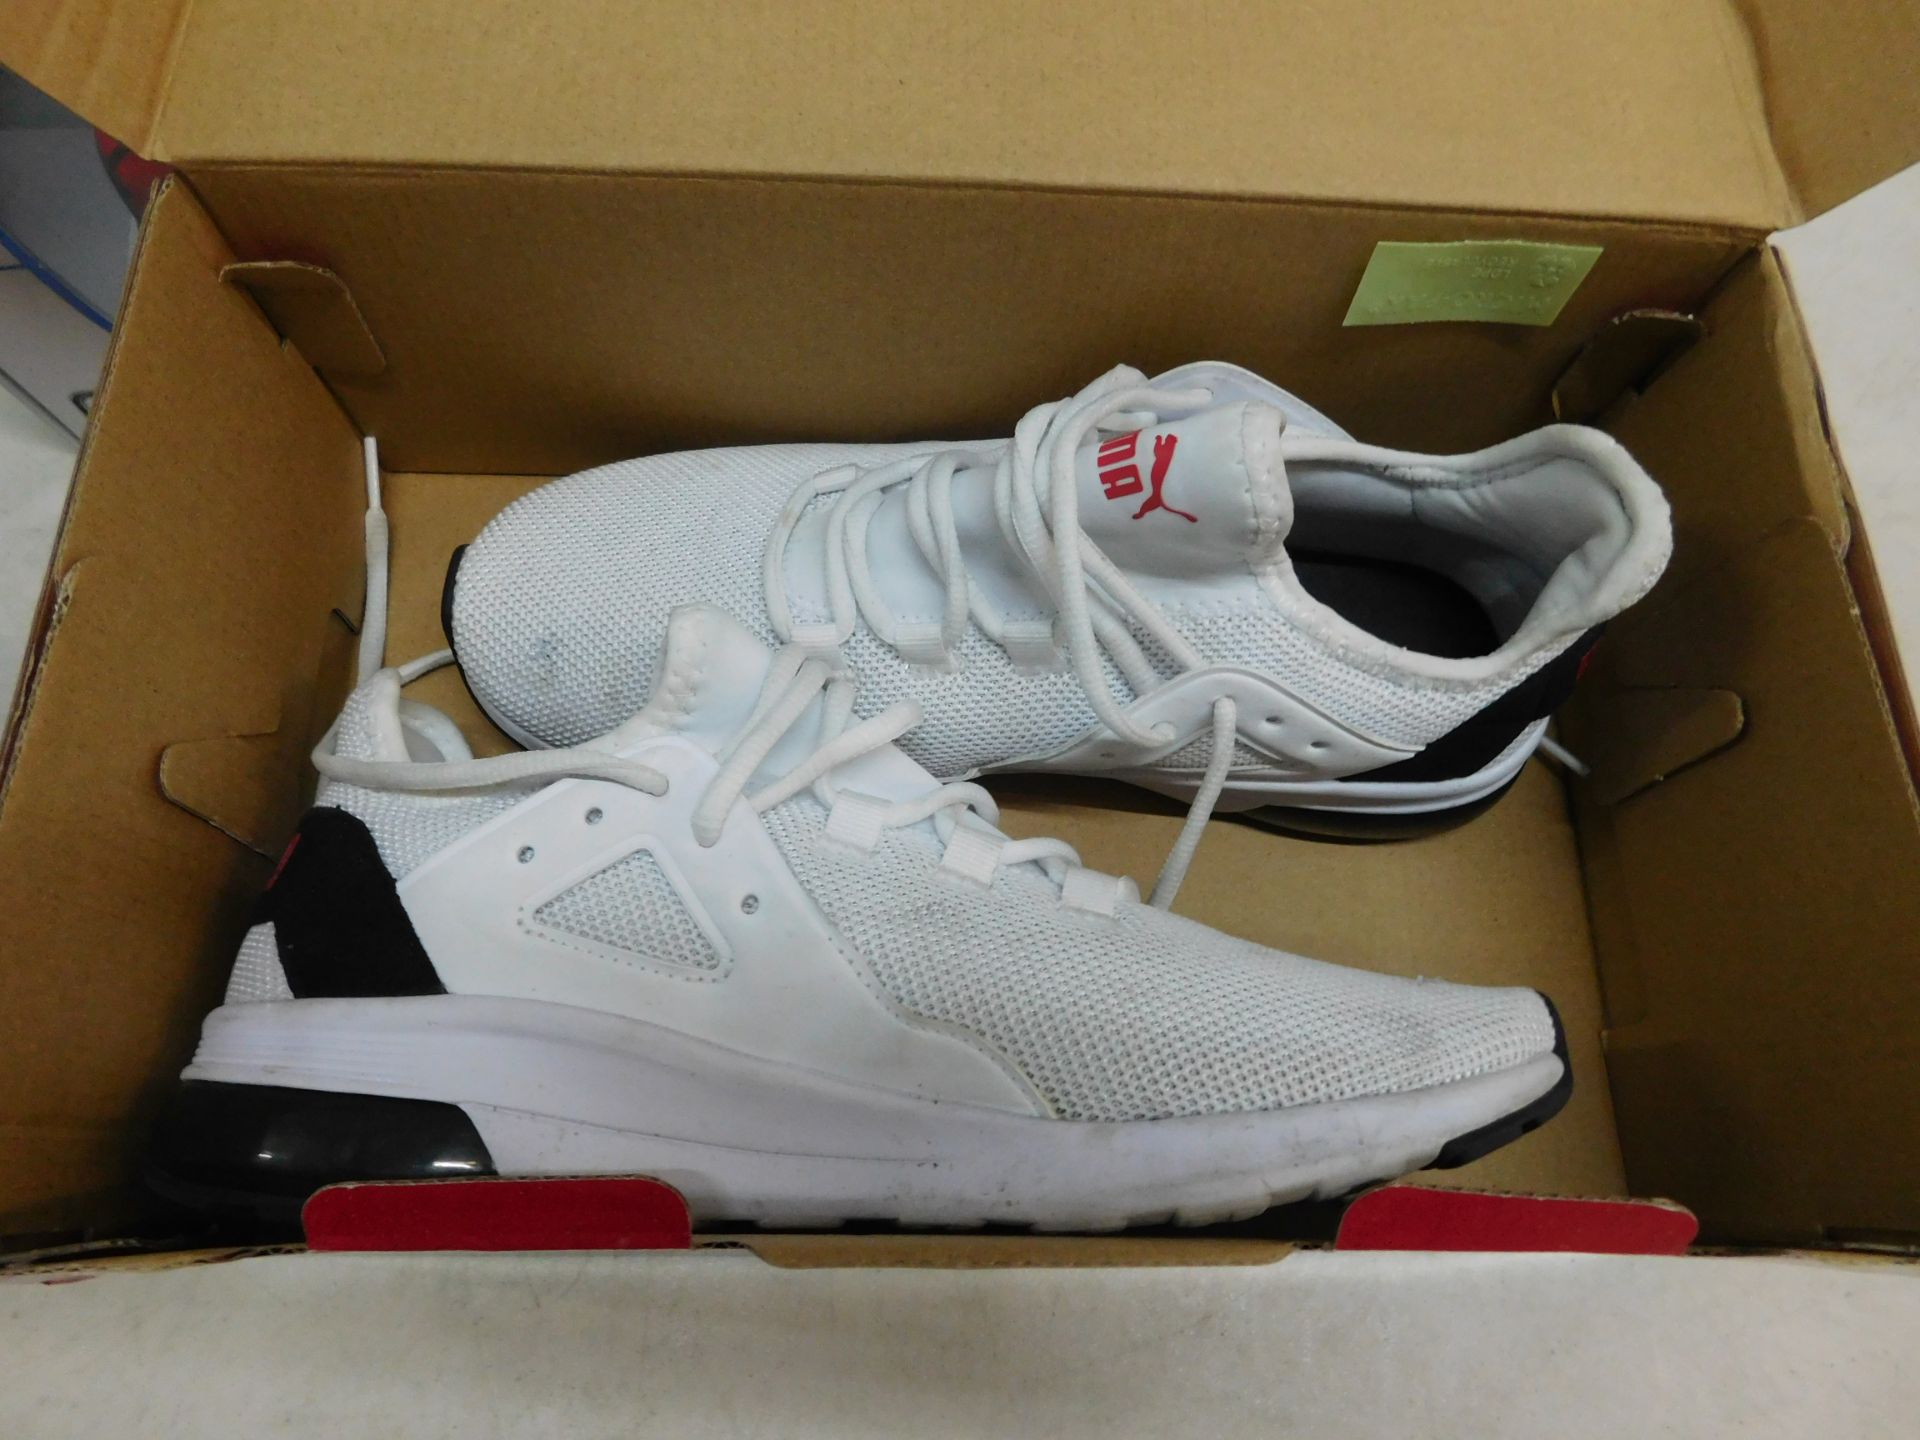 1 BOXED PUMA ELECTRON STREET C TRAINERS RRP Â£39.99